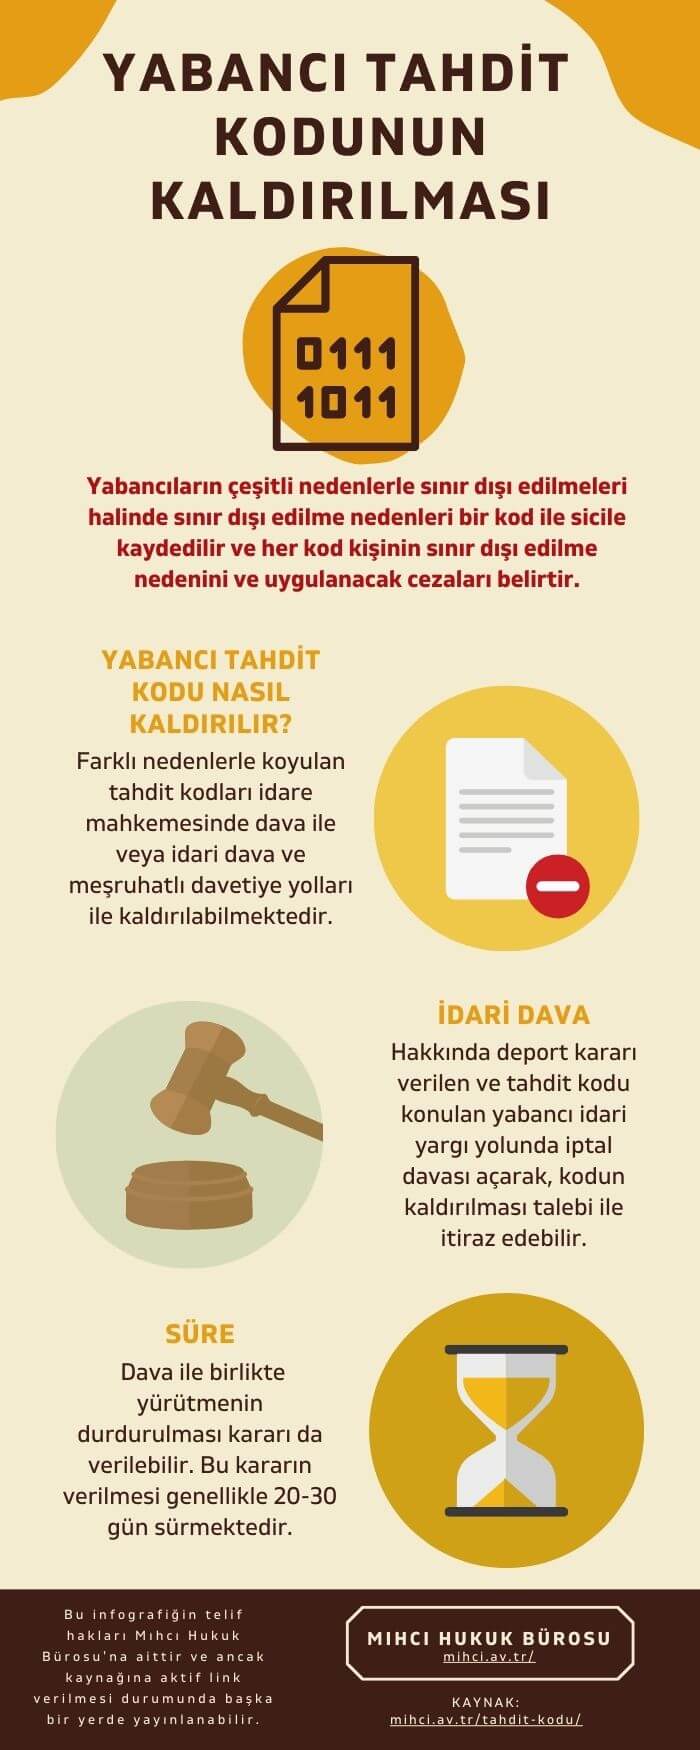 Removal of the Restriction Codes For Foreigners in Turkey infographic